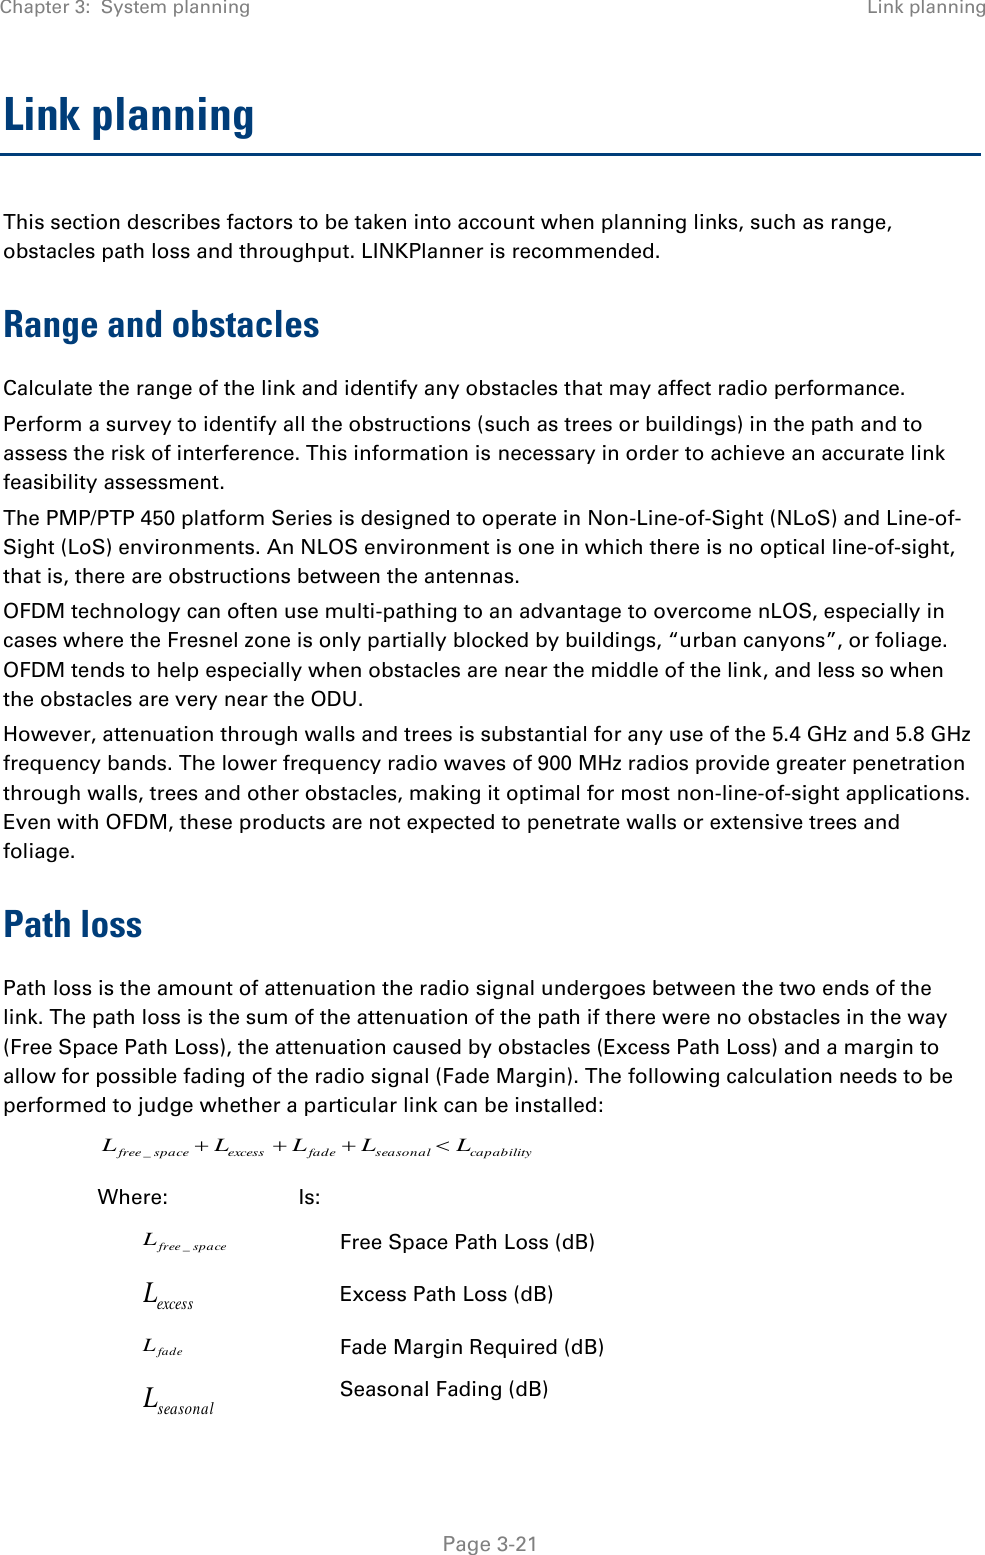 Chapter 3:  System planning Link planning   Page 3-21 Link planning This section describes factors to be taken into account when planning links, such as range, obstacles path loss and throughput. LINKPlanner is recommended. Range and obstacles Calculate the range of the link and identify any obstacles that may affect radio performance. Perform a survey to identify all the obstructions (such as trees or buildings) in the path and to assess the risk of interference. This information is necessary in order to achieve an accurate link feasibility assessment. The PMP/PTP 450 platform Series is designed to operate in Non-Line-of-Sight (NLoS) and Line-of-Sight (LoS) environments. An NLOS environment is one in which there is no optical line-of-sight, that is, there are obstructions between the antennas. OFDM technology can often use multi-pathing to an advantage to overcome nLOS, especially in cases where the Fresnel zone is only partially blocked by buildings, “urban canyons”, or foliage. OFDM tends to help especially when obstacles are near the middle of the link, and less so when the obstacles are very near the ODU. However, attenuation through walls and trees is substantial for any use of the 5.4 GHz and 5.8 GHz frequency bands. The lower frequency radio waves of 900 MHz radios provide greater penetration through walls, trees and other obstacles, making it optimal for most non-line-of-sight applications. Even with OFDM, these products are not expected to penetrate walls or extensive trees and foliage. Path loss Path loss is the amount of attenuation the radio signal undergoes between the two ends of the link. The path loss is the sum of the attenuation of the path if there were no obstacles in the way (Free Space Path Loss), the attenuation caused by obstacles (Excess Path Loss) and a margin to allow for possible fading of the radio signal (Fade Margin). The following calculation needs to be performed to judge whether a particular link can be installed: capabilityseasonalfadeexcessspacefree LLLLL _ Where: Is: spacefreeL_ Free Space Path Loss (dB) excessL Excess Path Loss (dB) fadeL Fade Margin Required (dB) seasonalL Seasonal Fading (dB) 